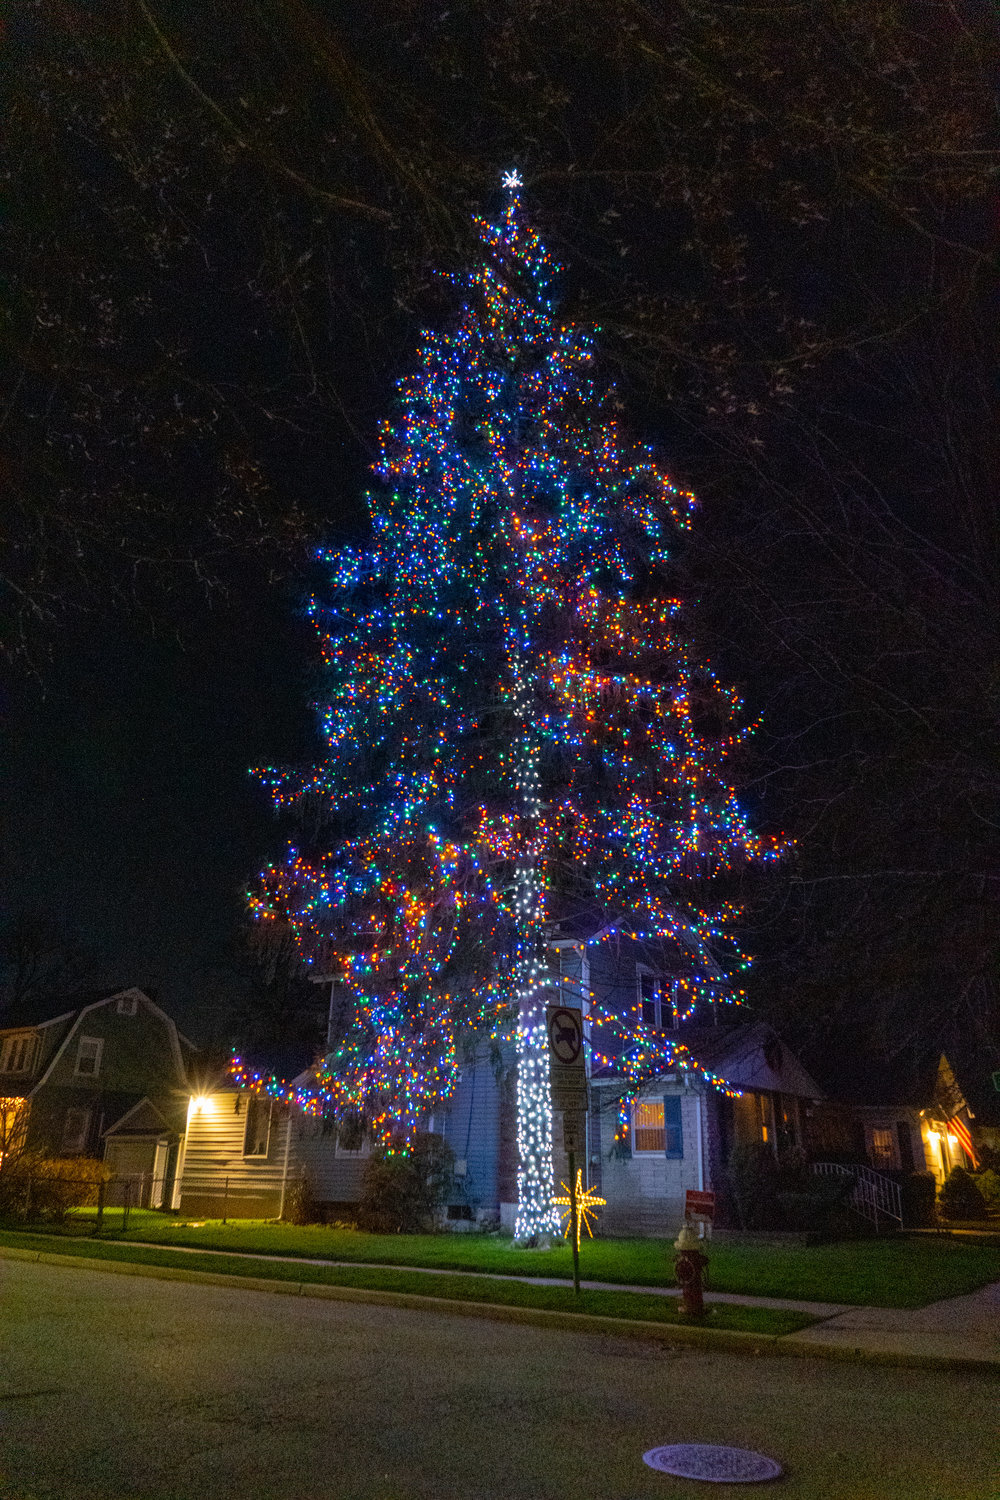 Blazdell’s 85-foot tree, decorated for the holidays, in previous years